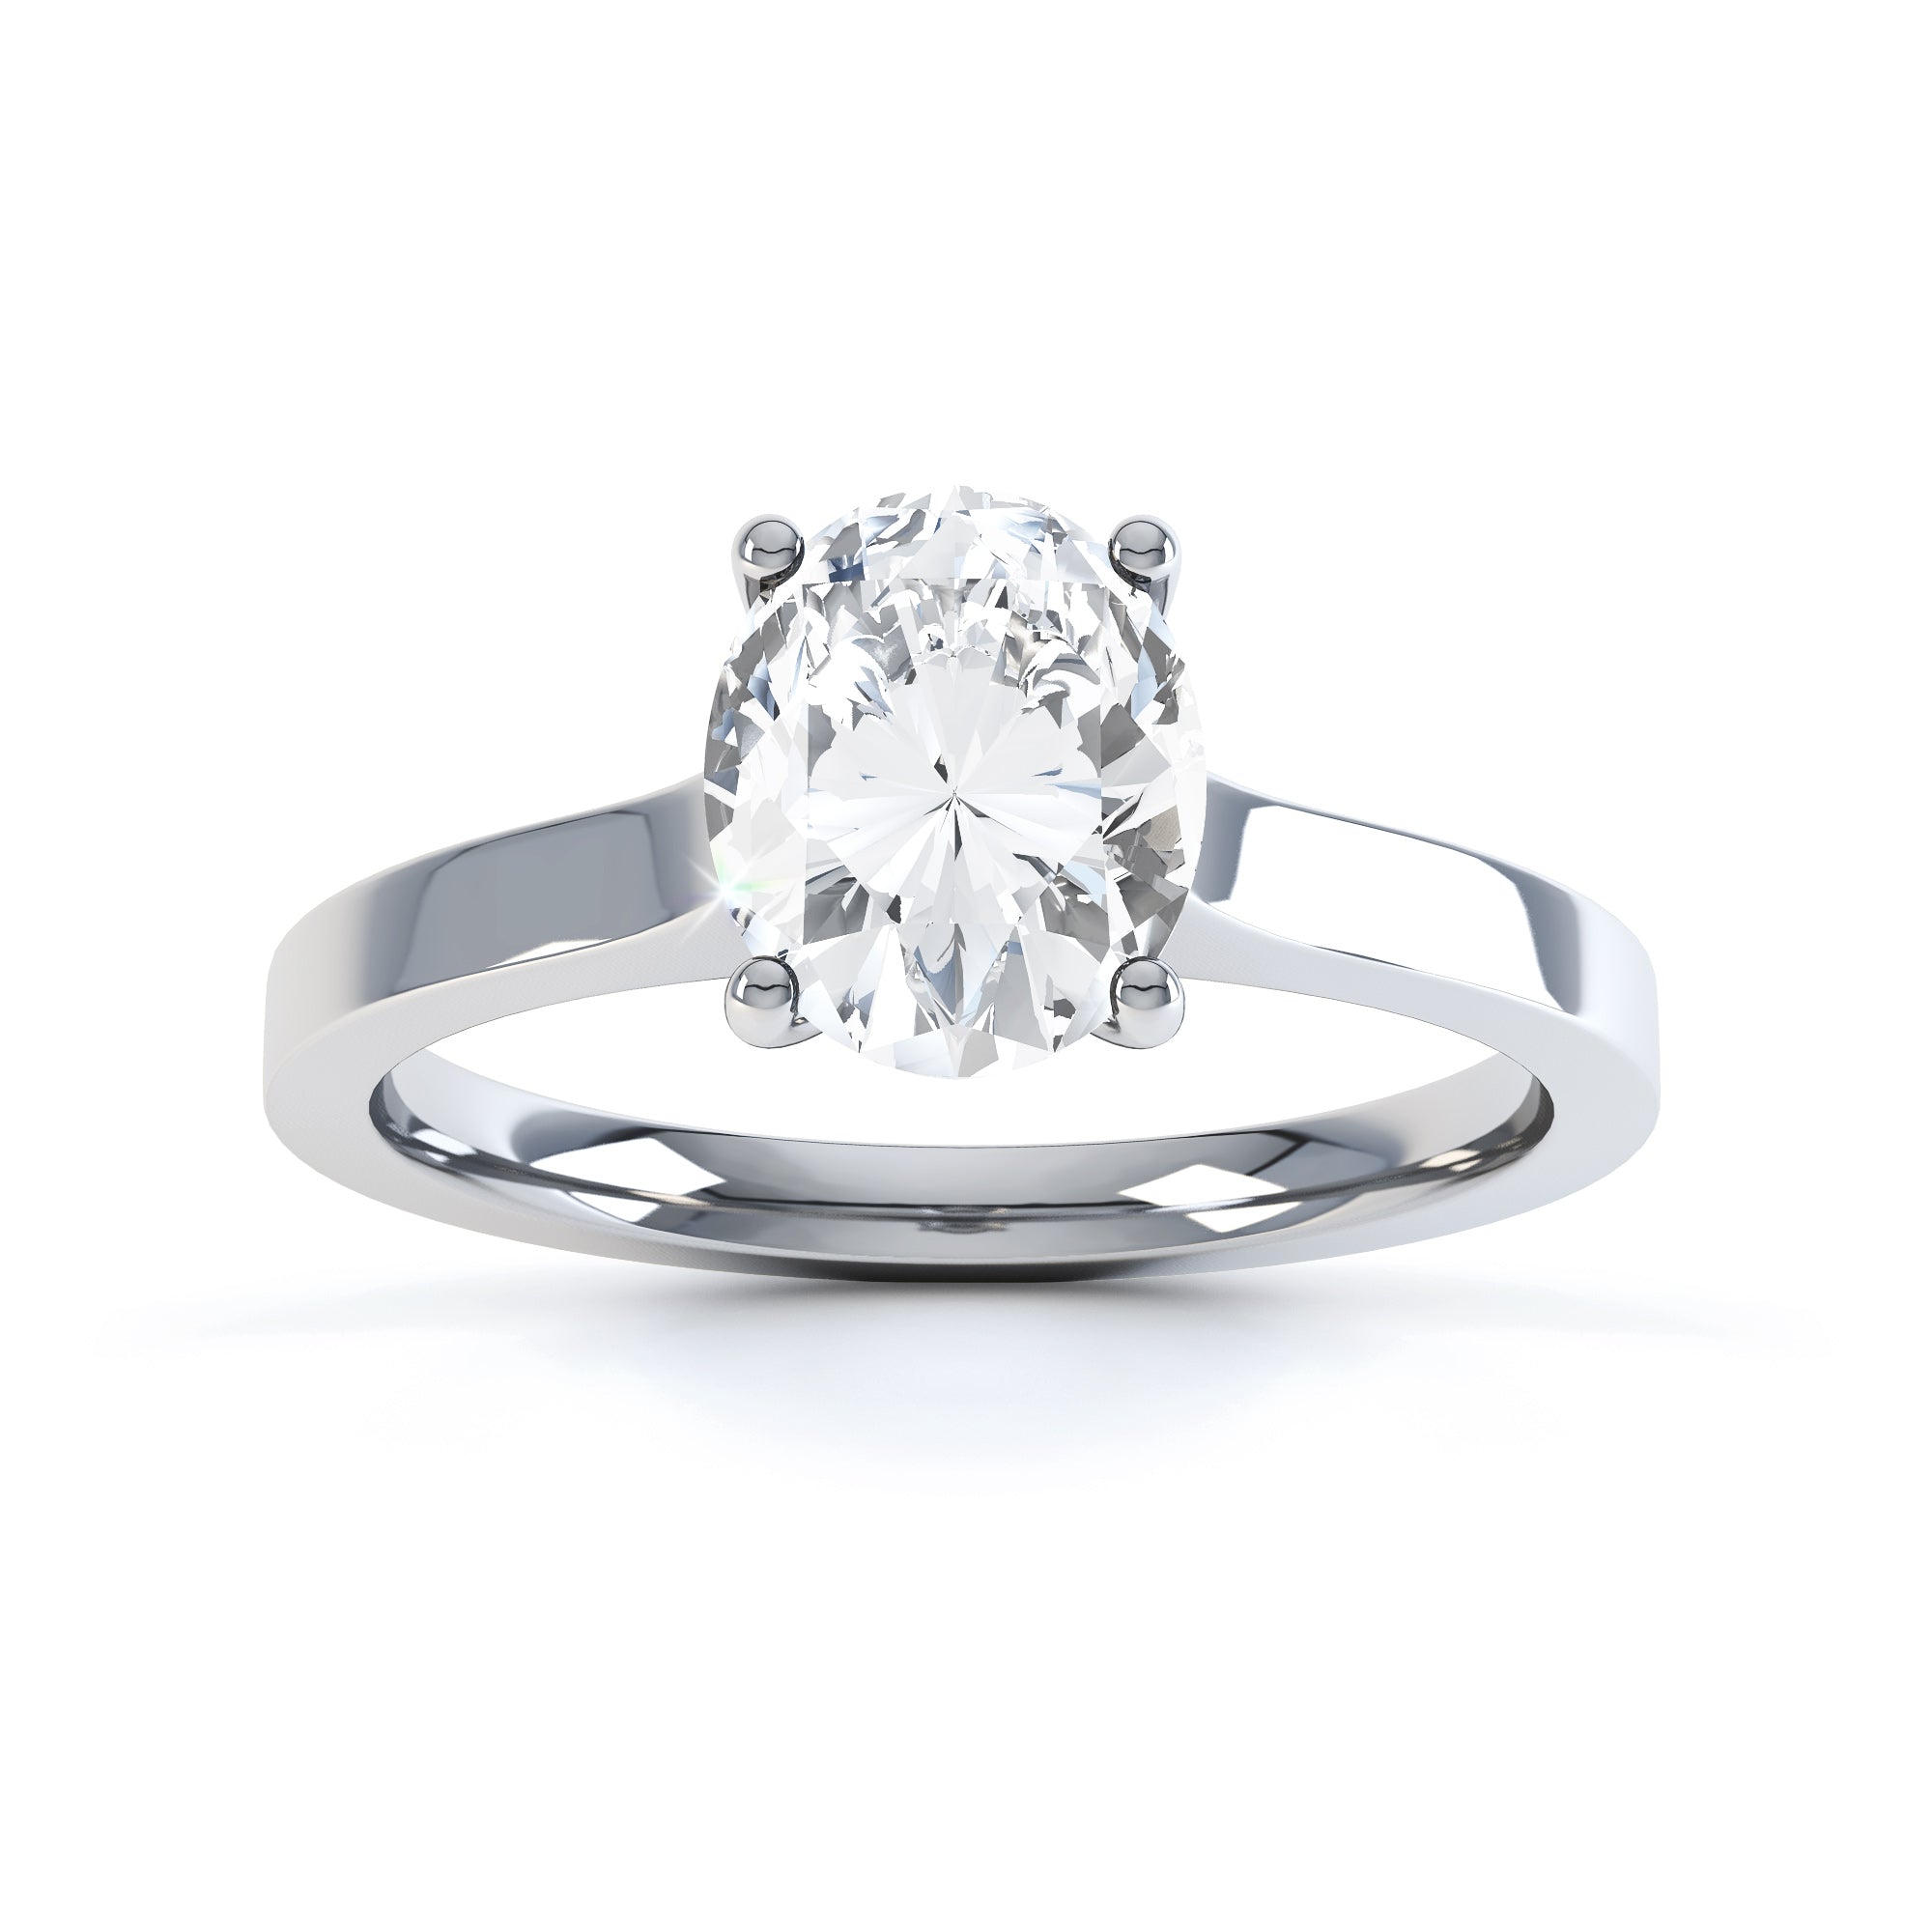 Oval Cut Centre Stone, 4 claw set, Diamond Engagement Ring with Parrallel Shoulders